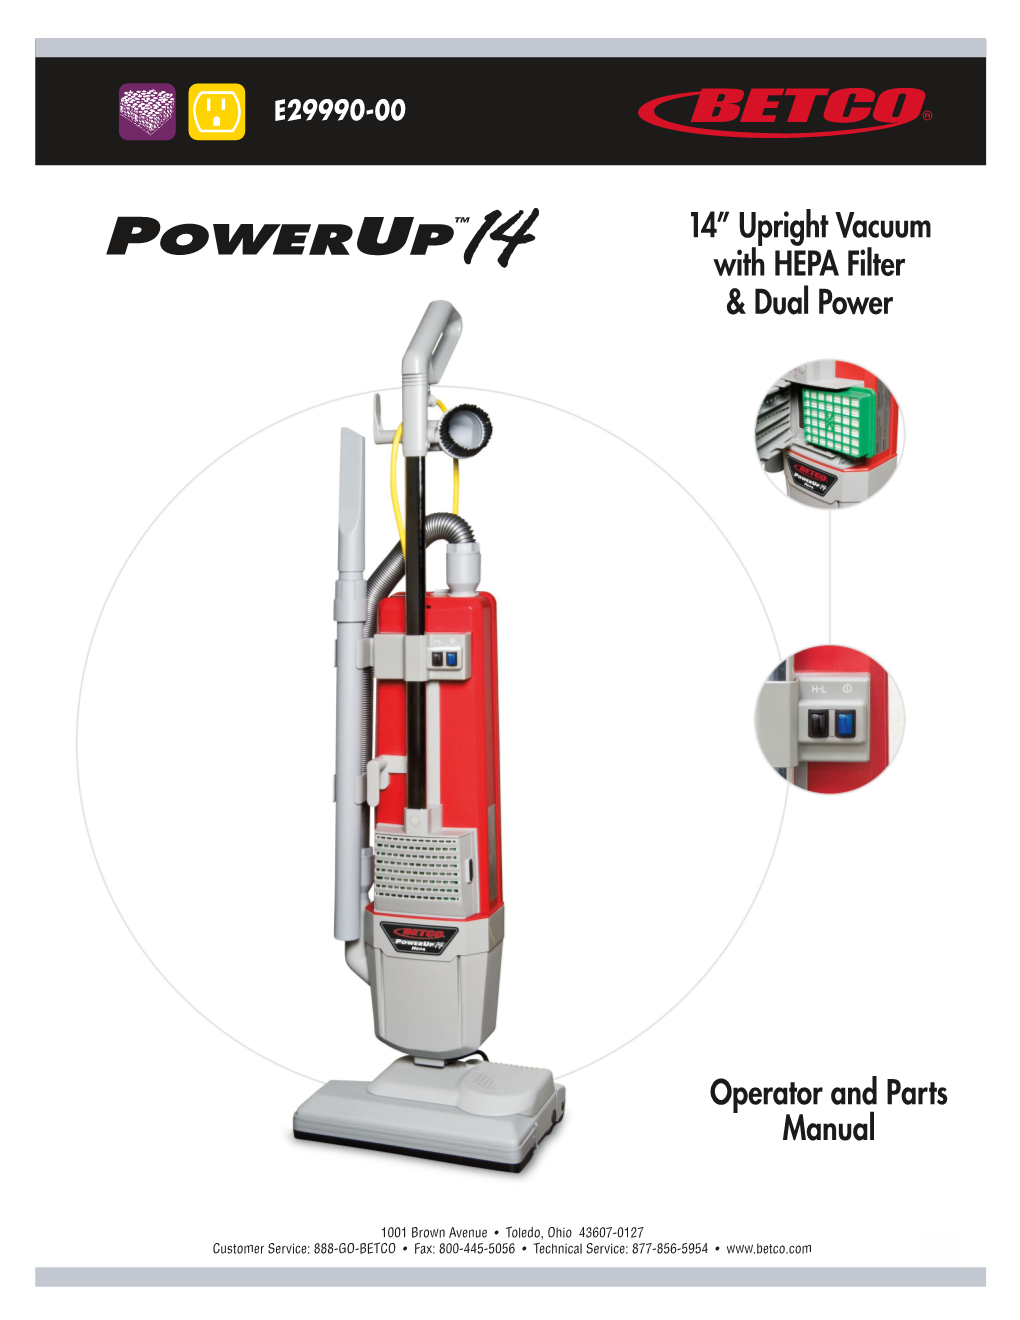 14” Upright Vacuum with HEPA Filter & Dual Power Operator and Parts